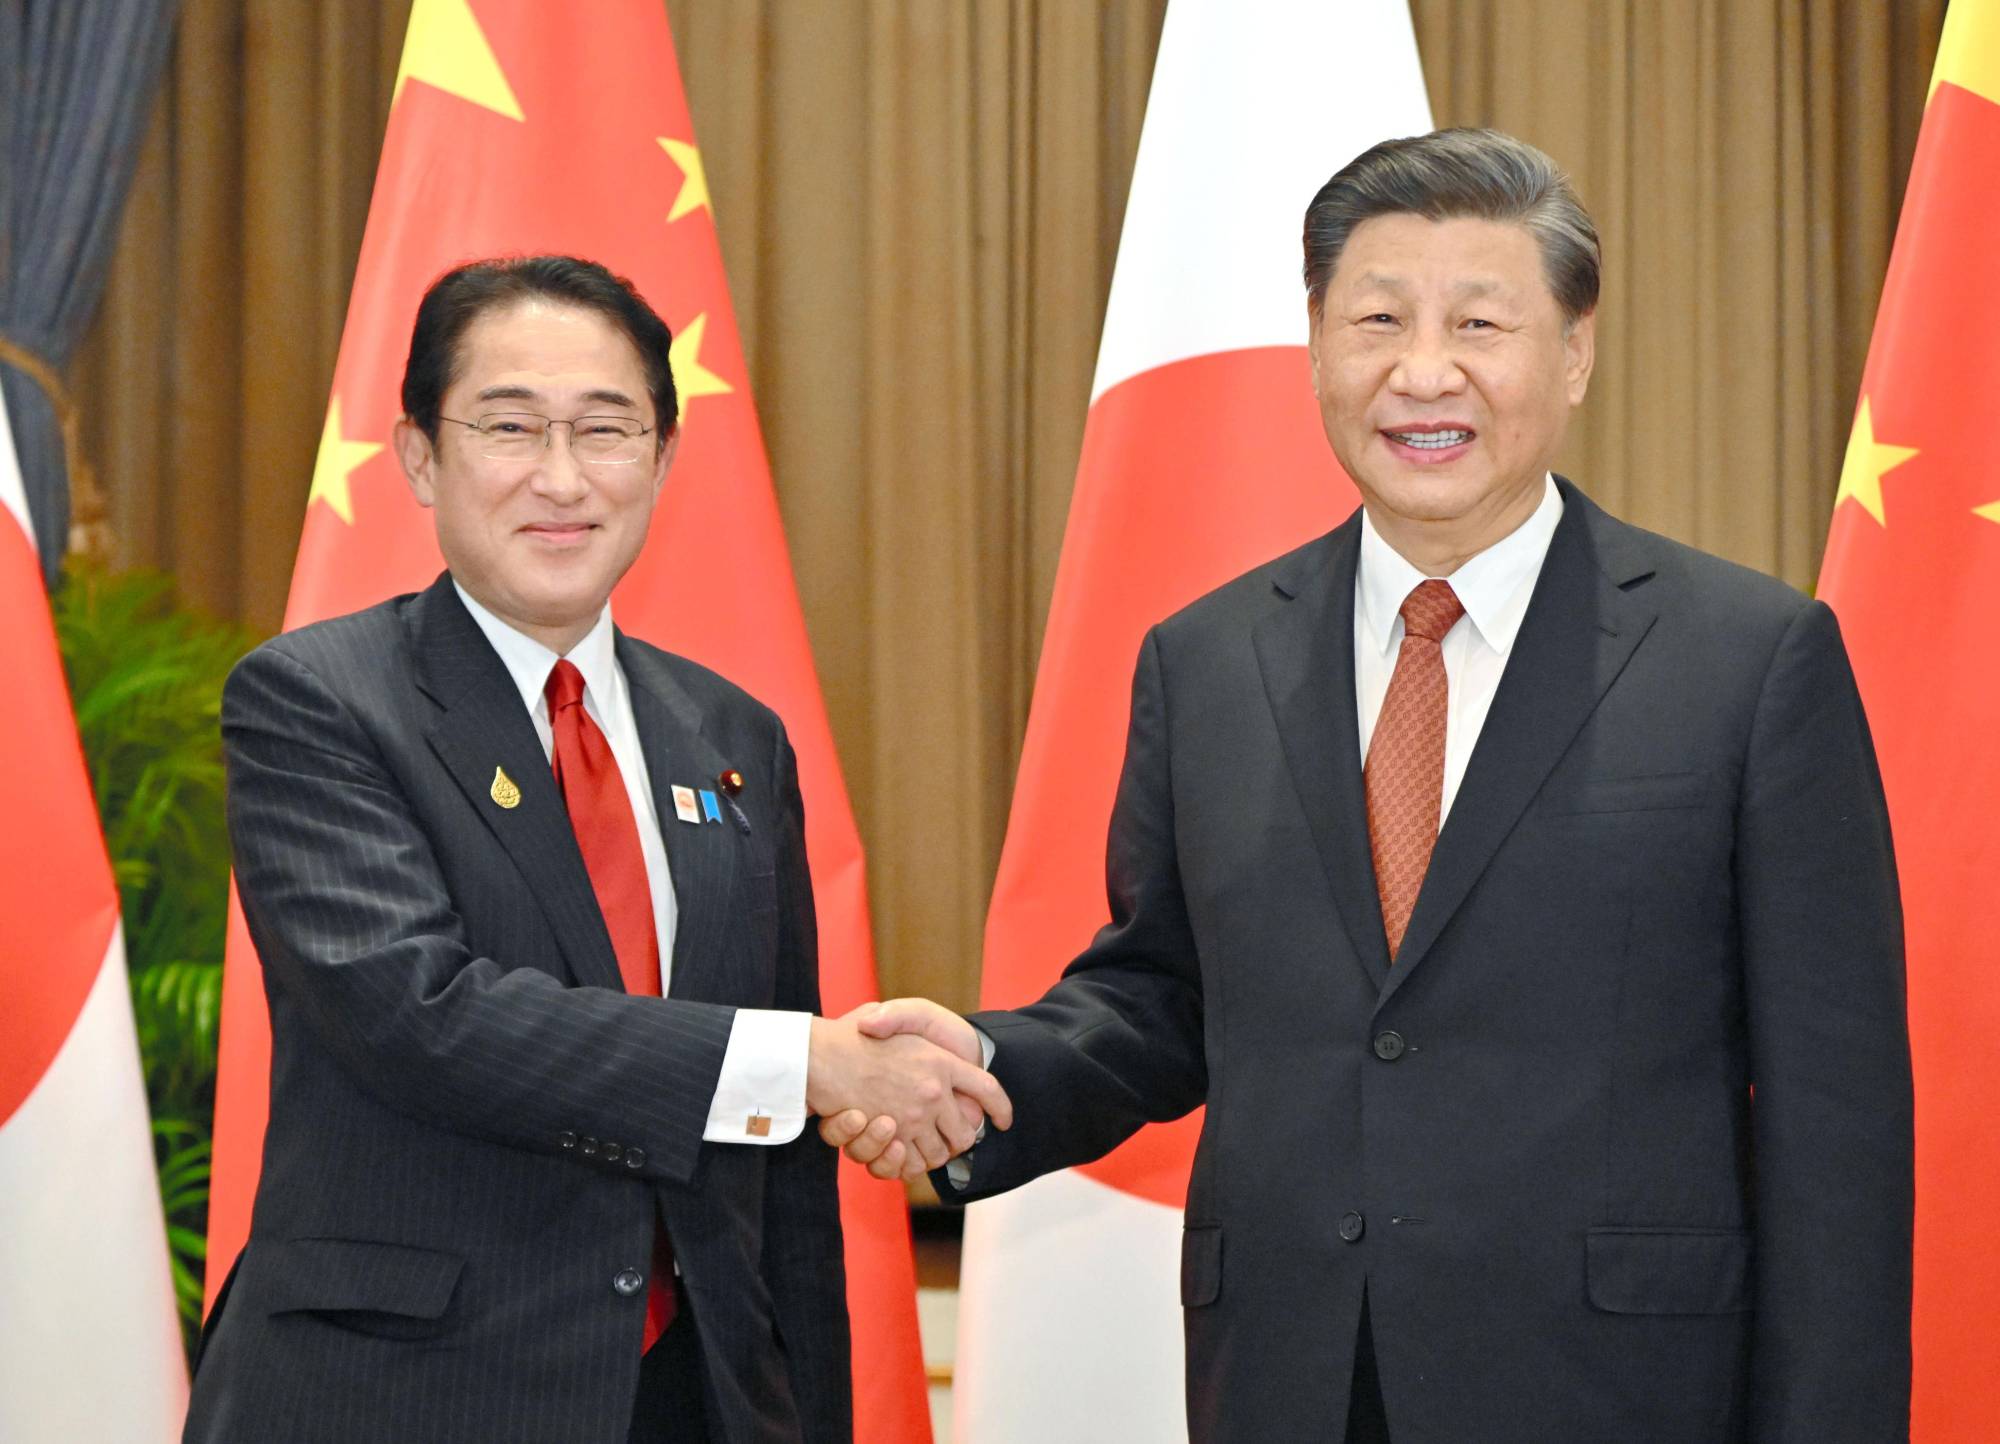 Prime Minister Fumio Kishida meets Chinese President Xi Jinping on the sidelines of the APEC leaders' summit in Bangkok on Thursday. | KYODO